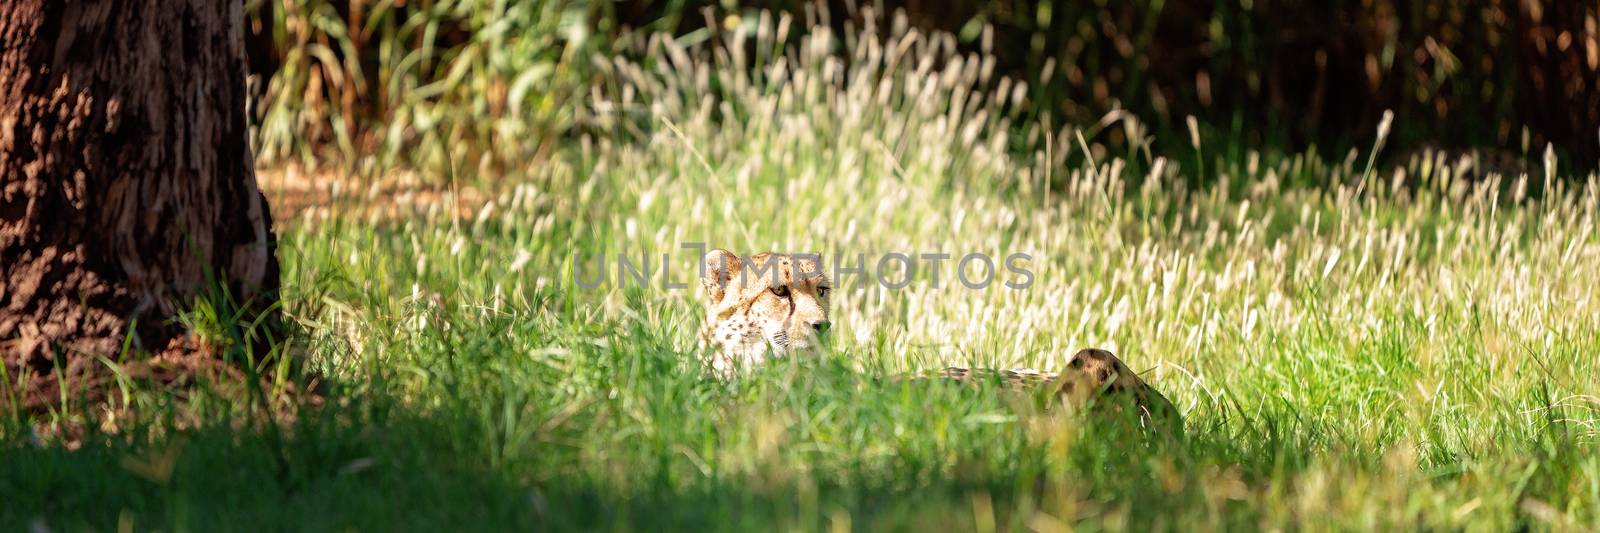 A sneaky cheetah hiding in tall grass in a patch of sunlight, waiting for its prey